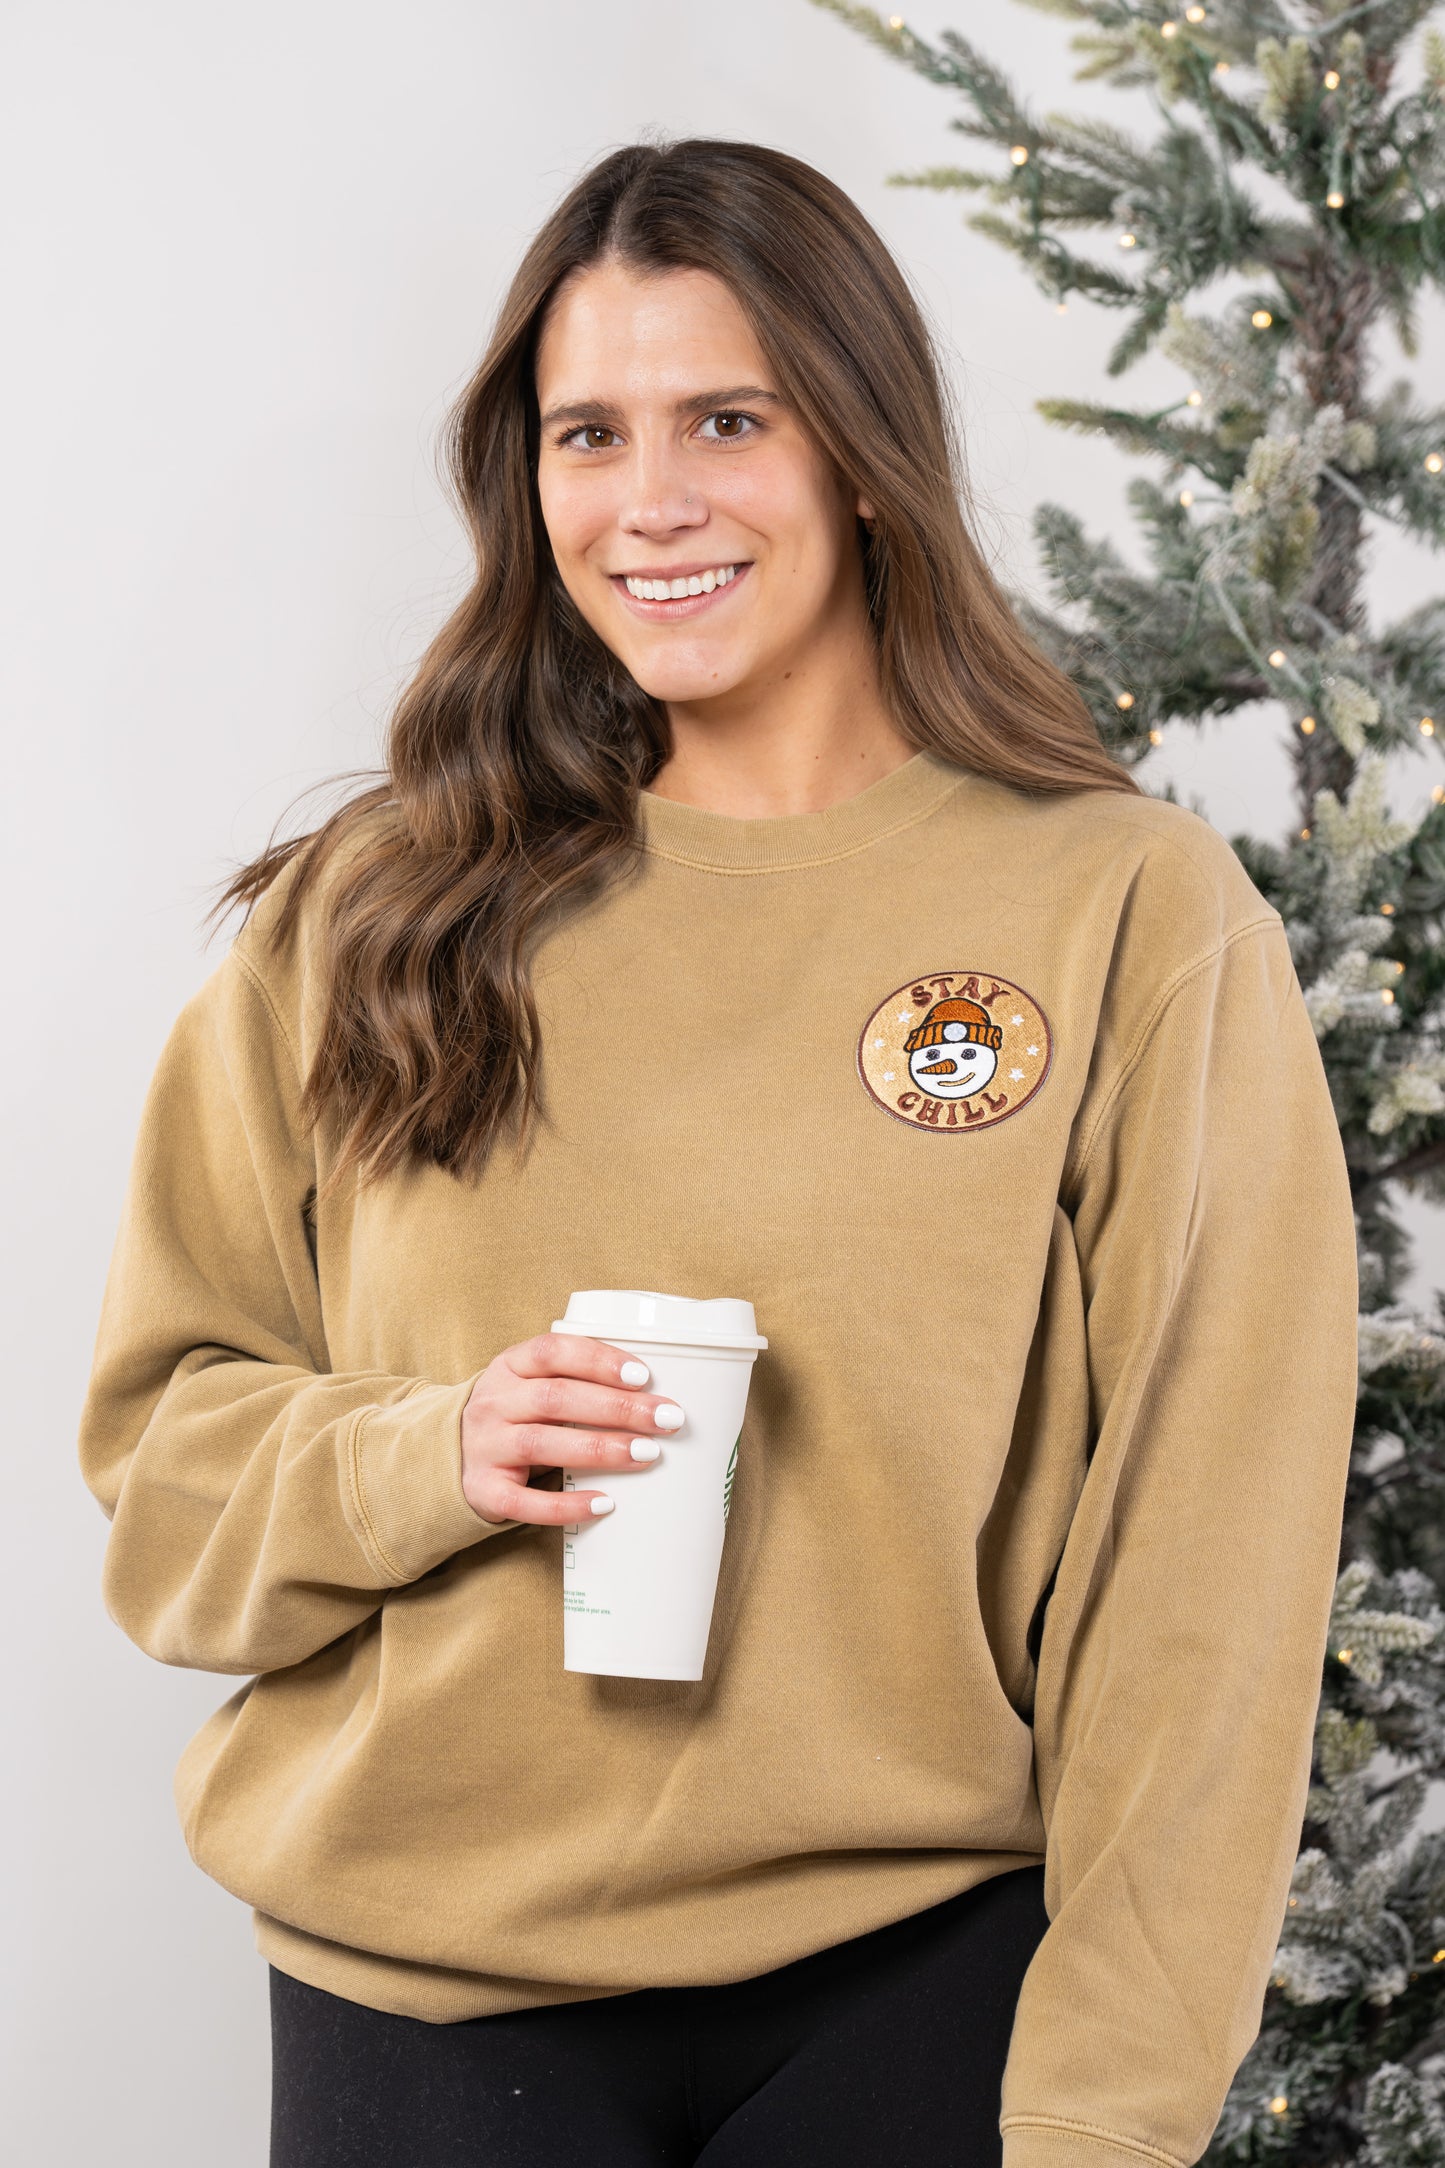 Stay Chill Snowman - Embroidered Sweatshirt (Tan)